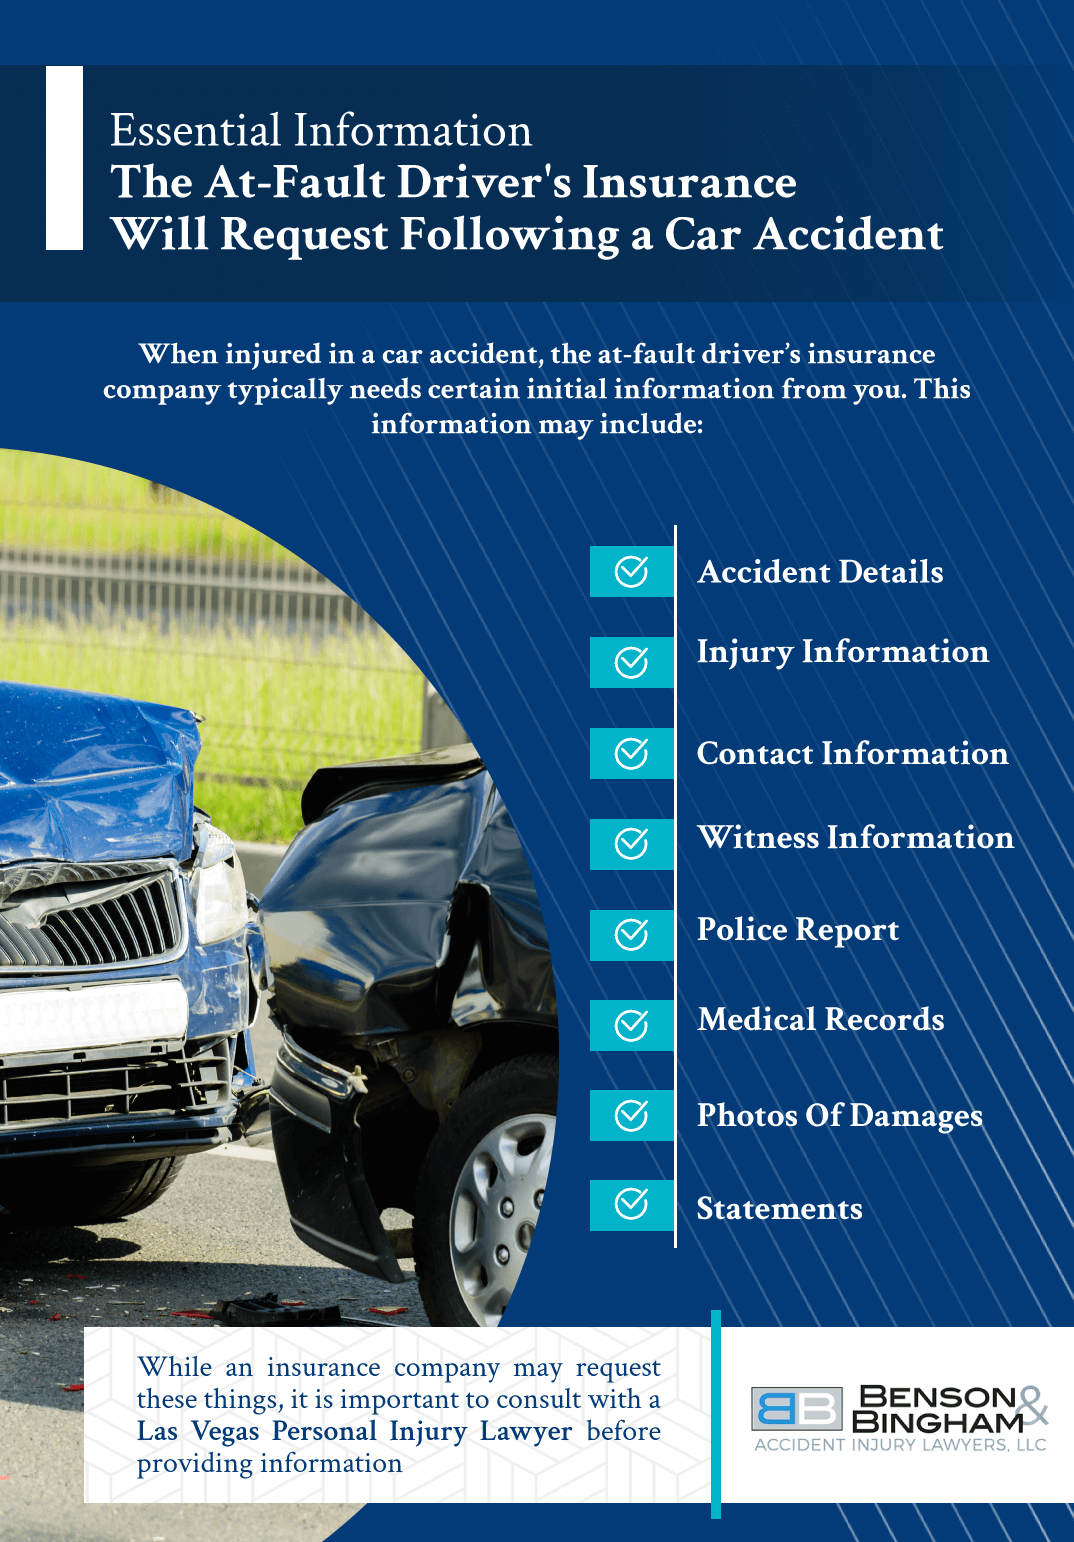 Infographic that explains the Essential Information The At-Fault Driver's Insurance Will Request Following a Car Accident